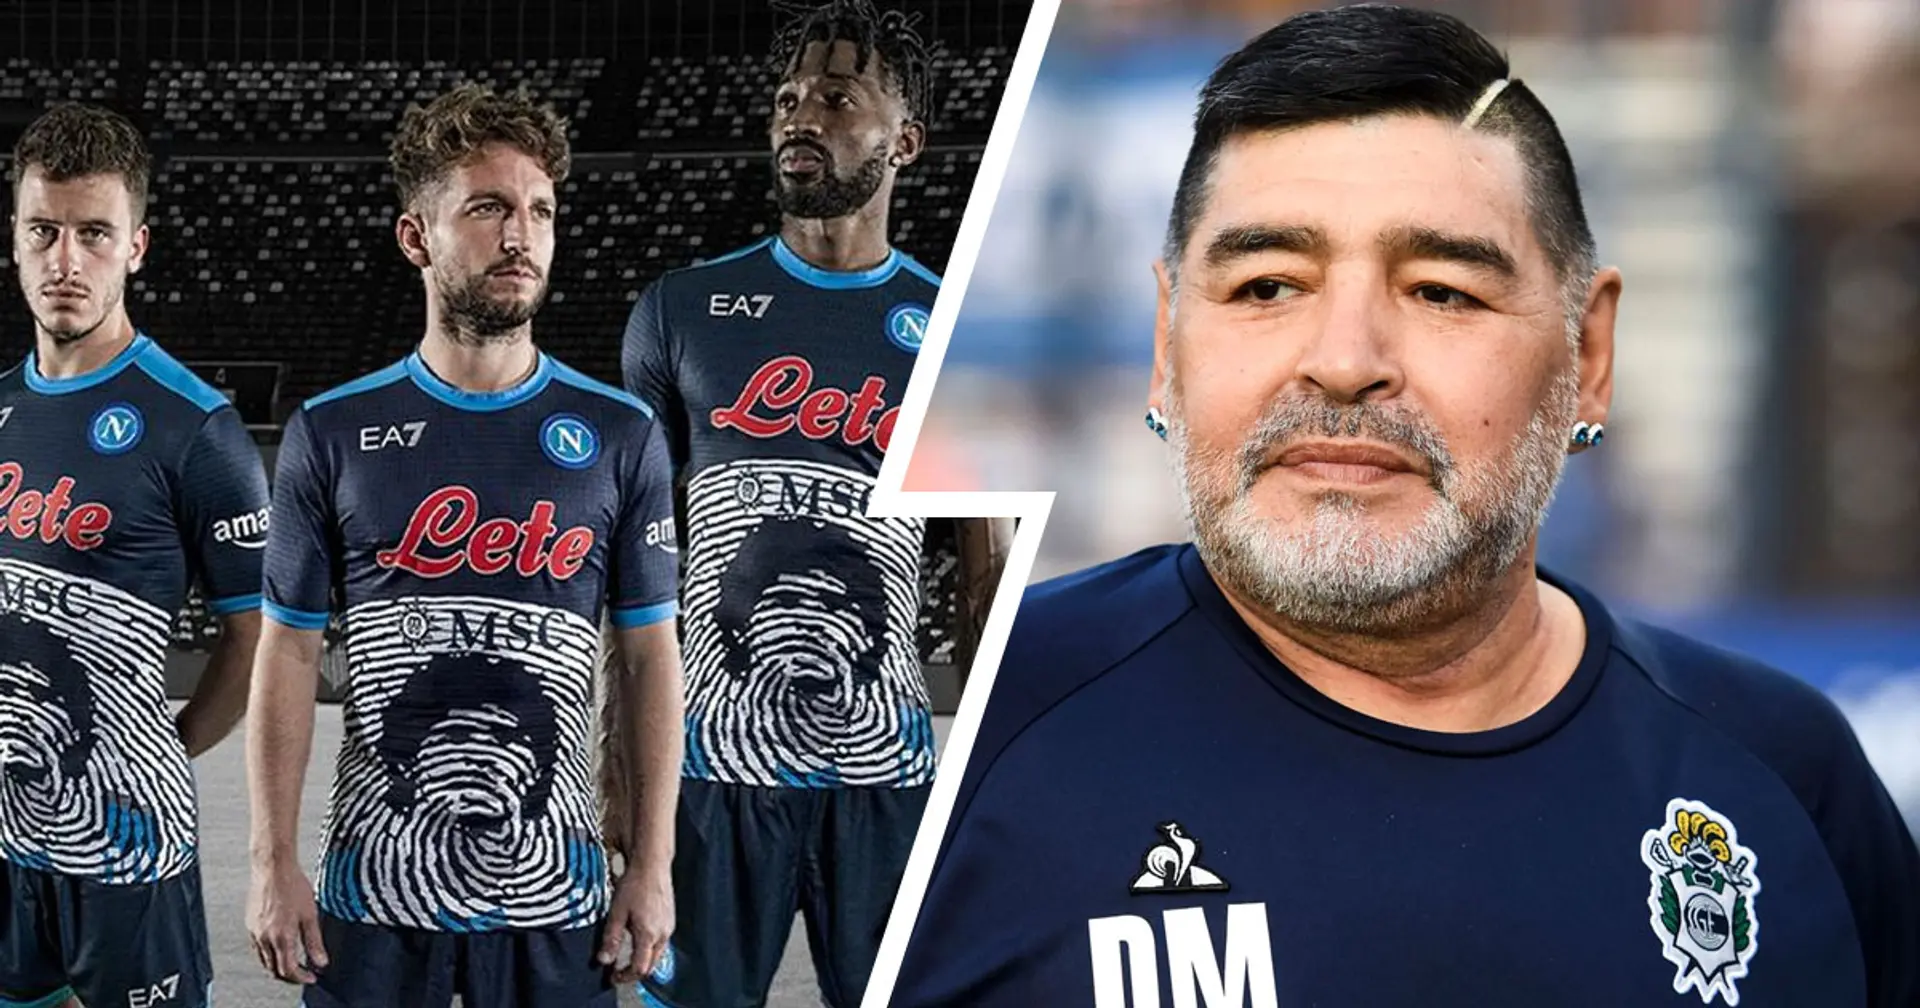 Napoli to commemorate Maradona's one-year death anniversary with specialized jersey